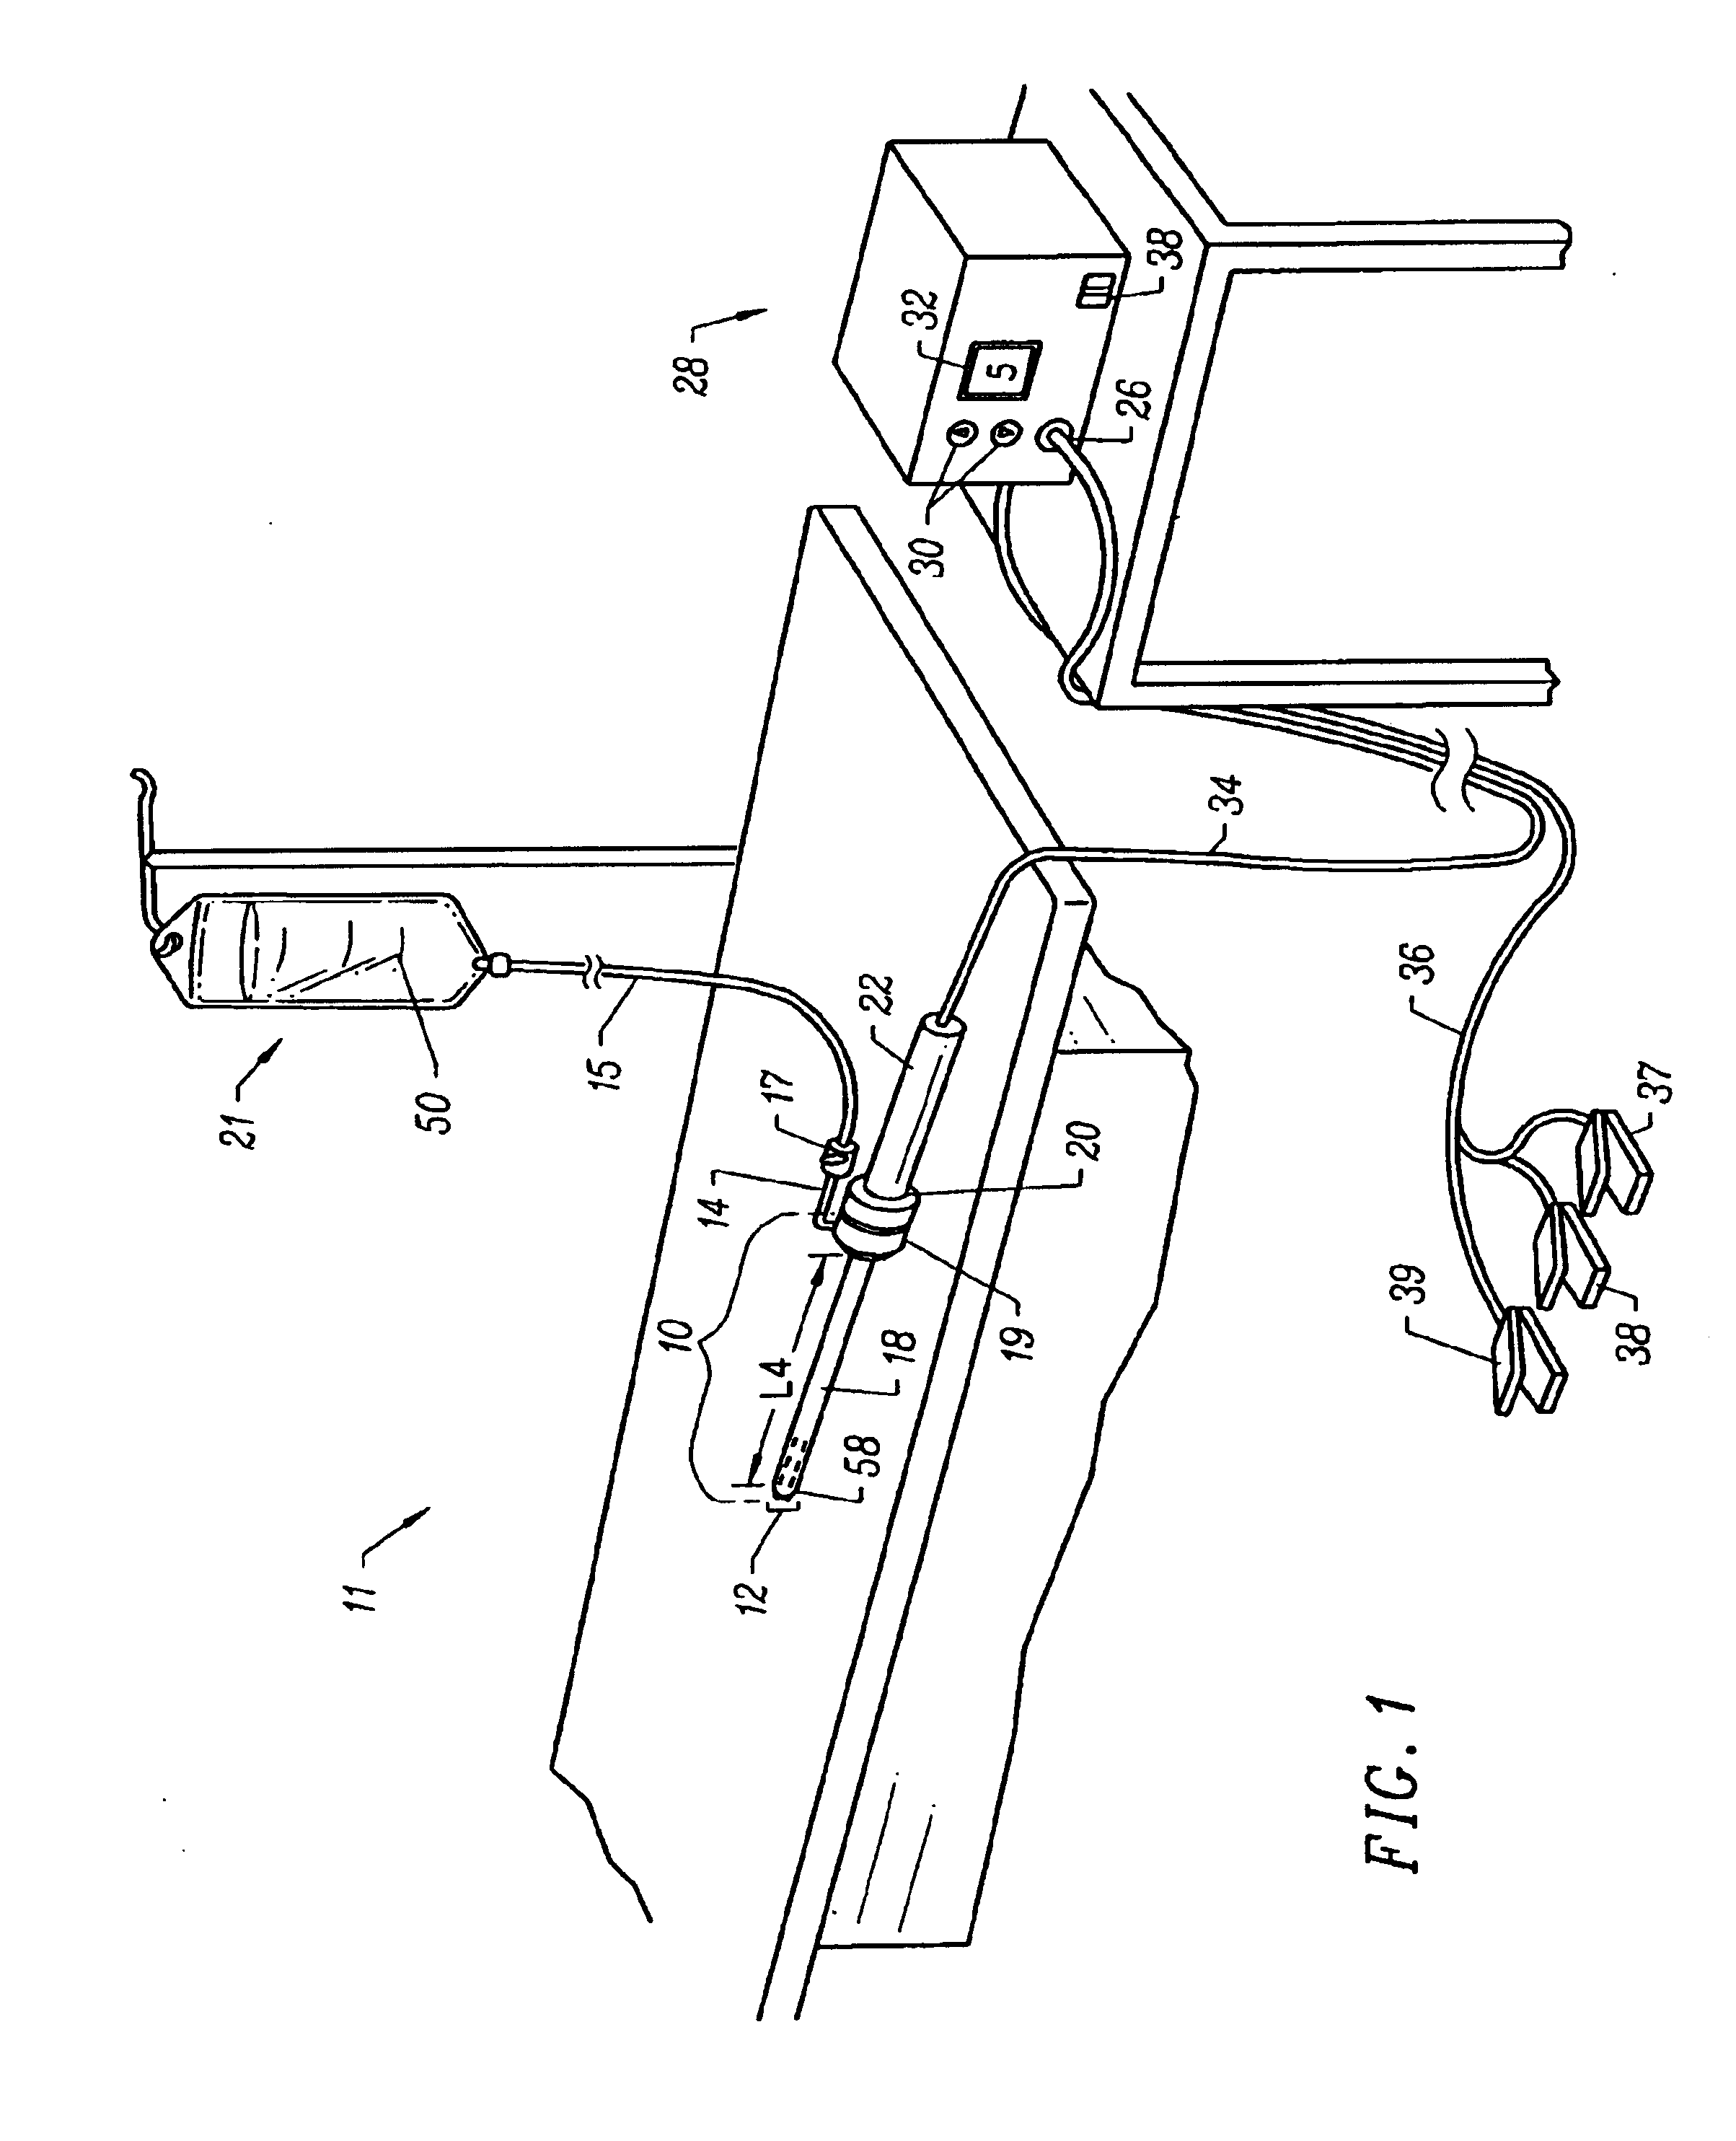 Methods for electrosurgical tissue contraction within the spine